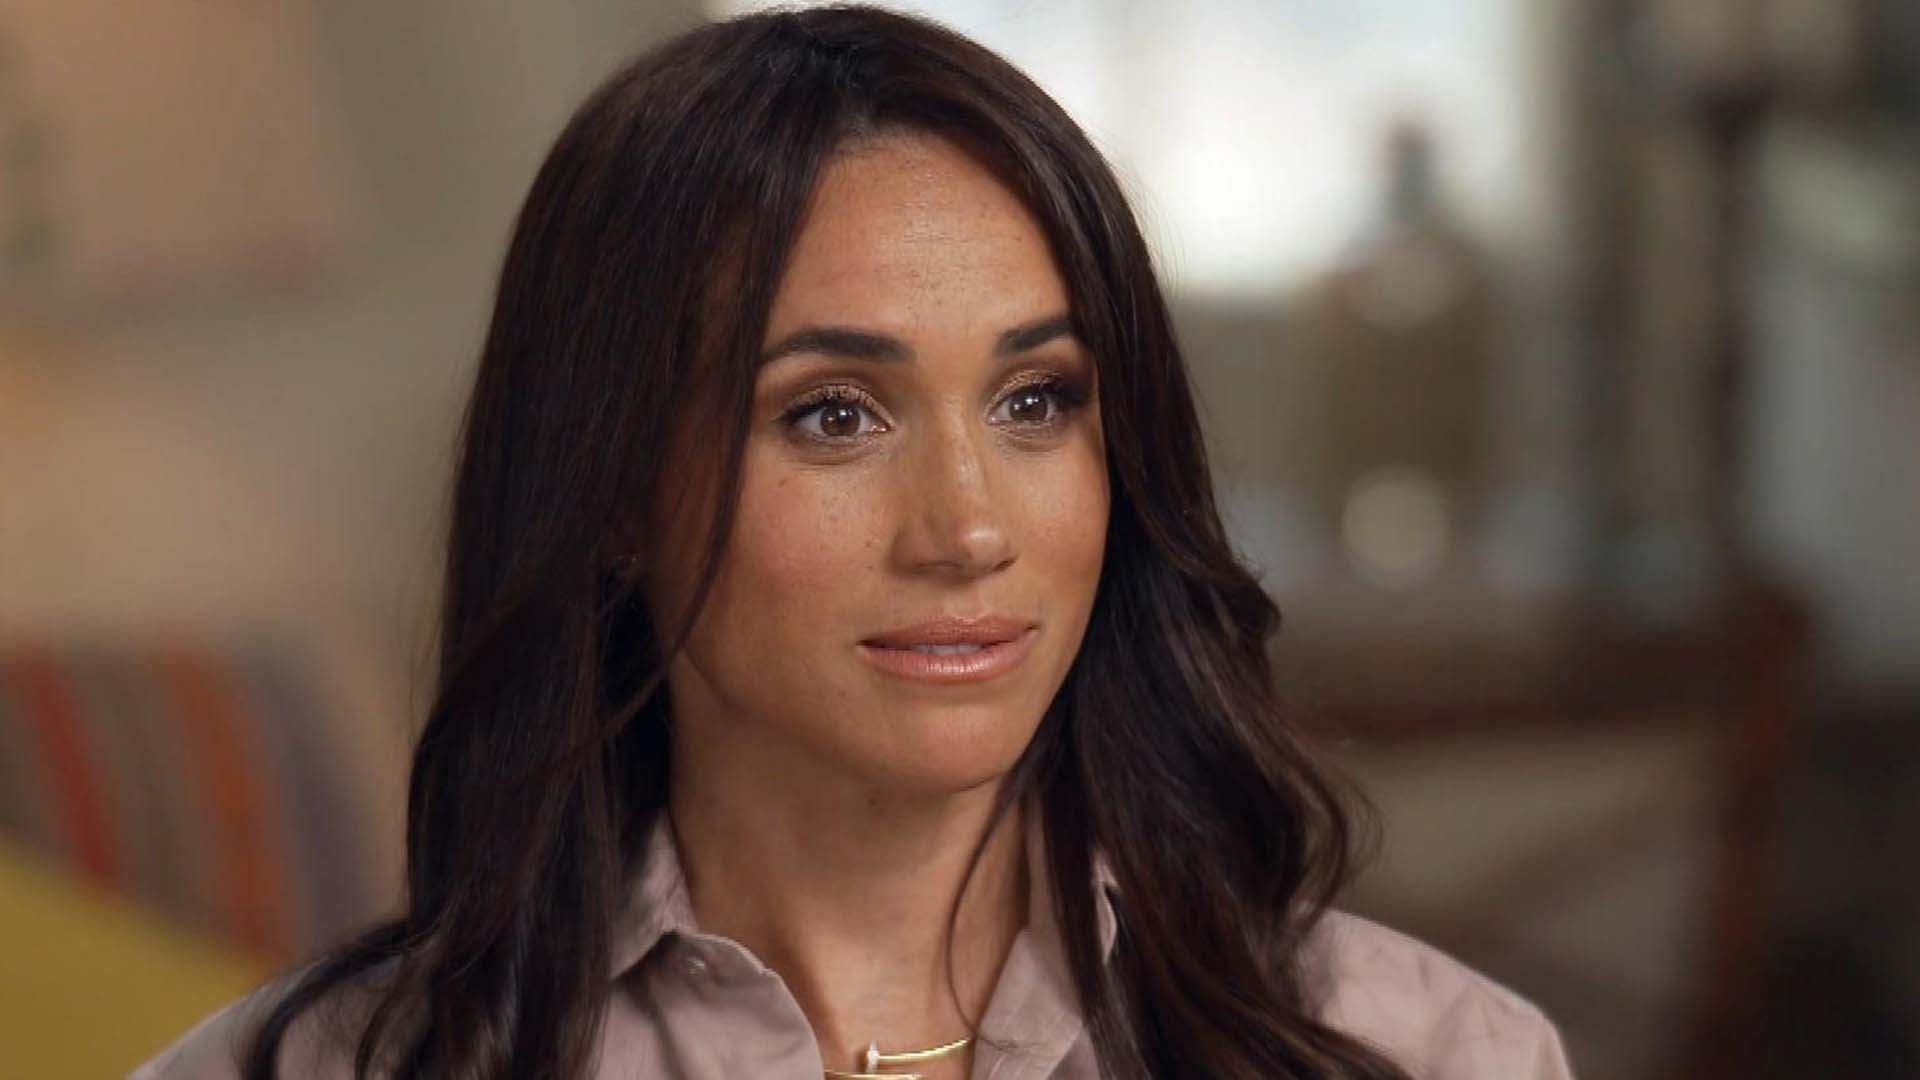 Meghan Markle Explains Why She Opened Up About Struggle With Suicidal Thoughts